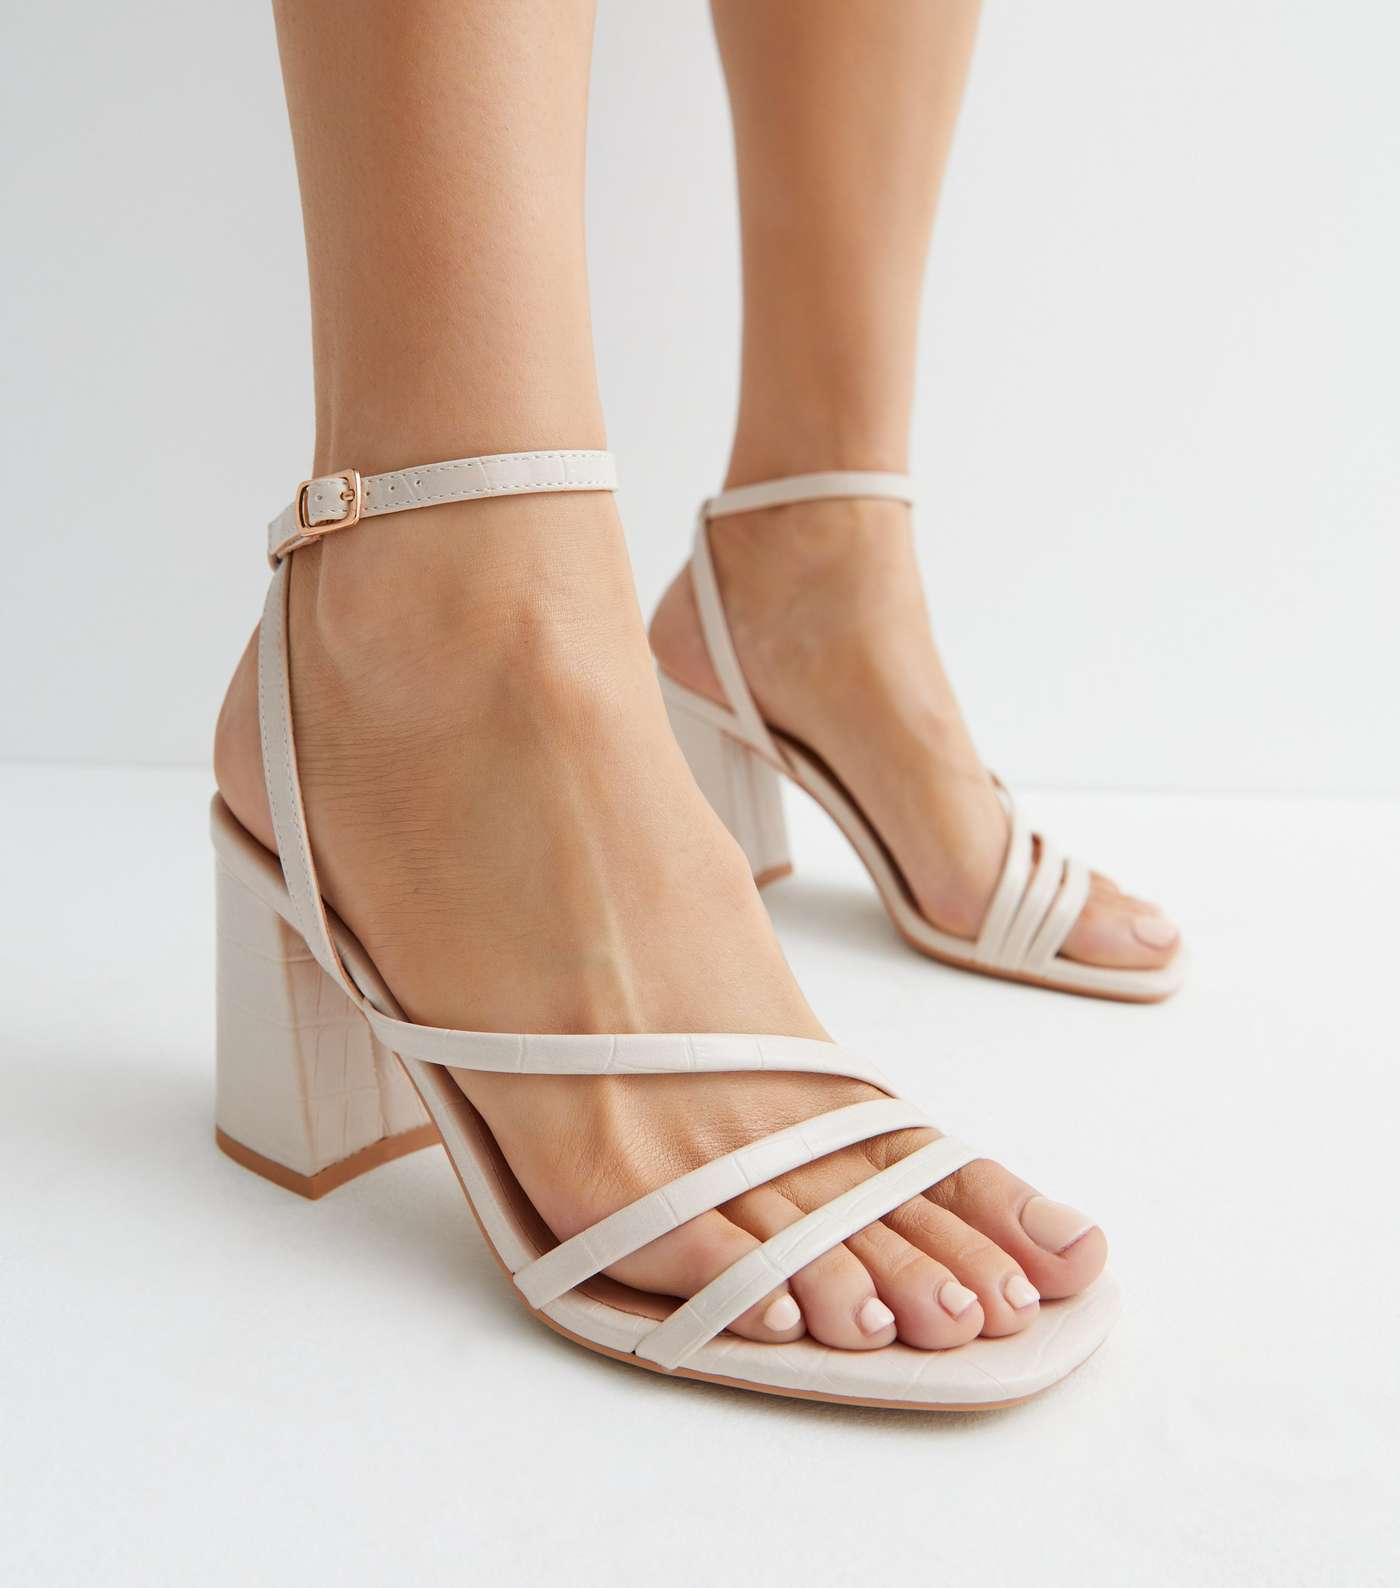 Off White Leather-Look Strappy Block Heel Sandals Image 2